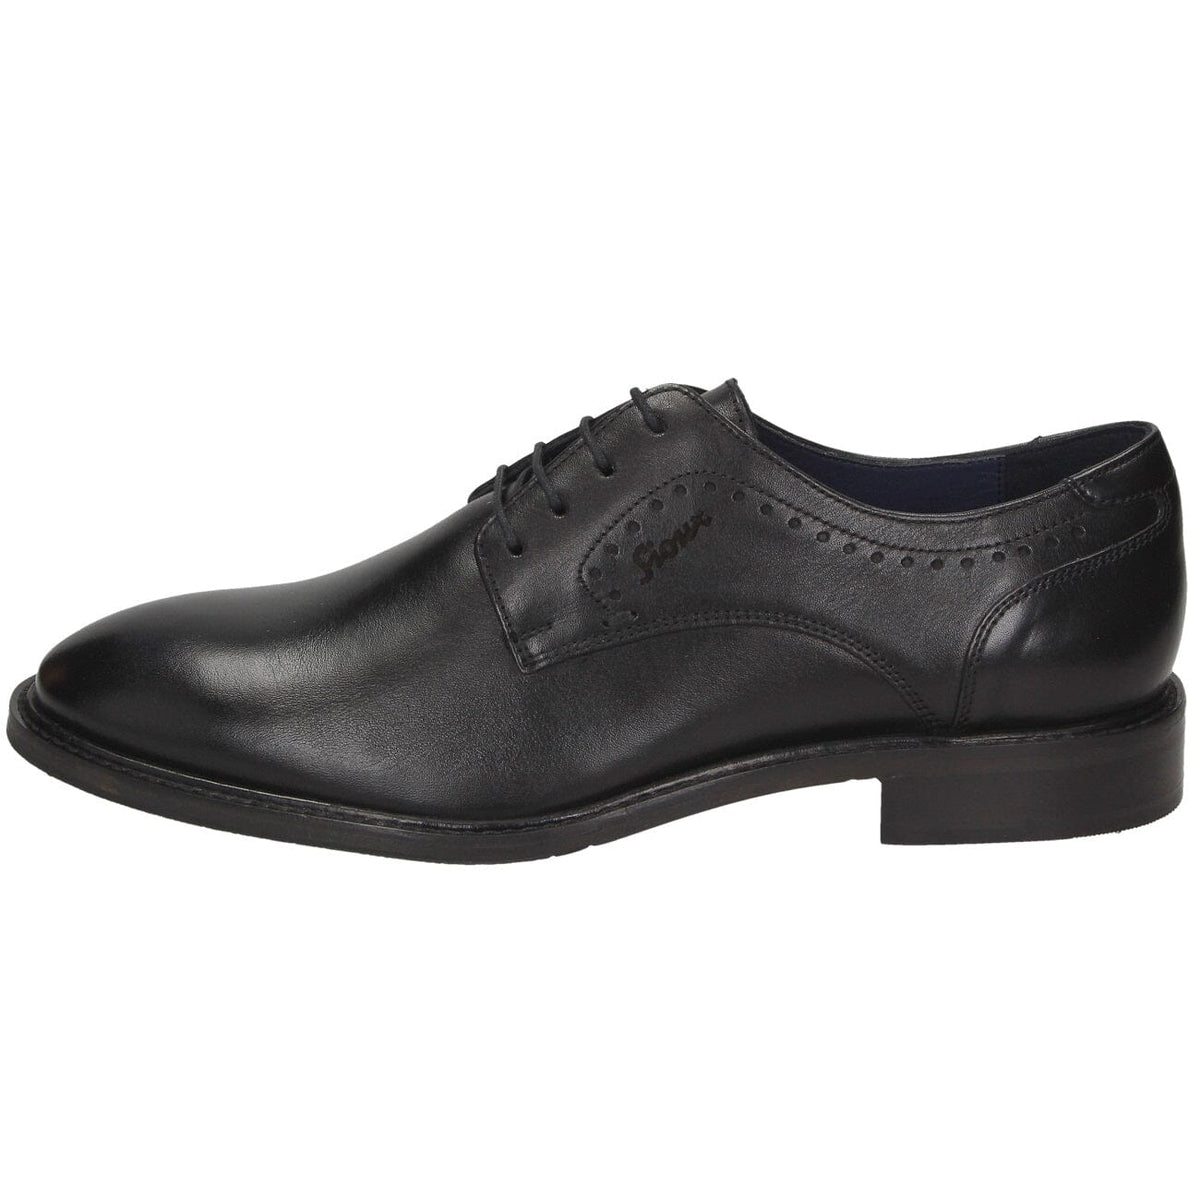 Sioux, GERIONDO, Shoe, Leather, Schwarz Shoes Sioux 